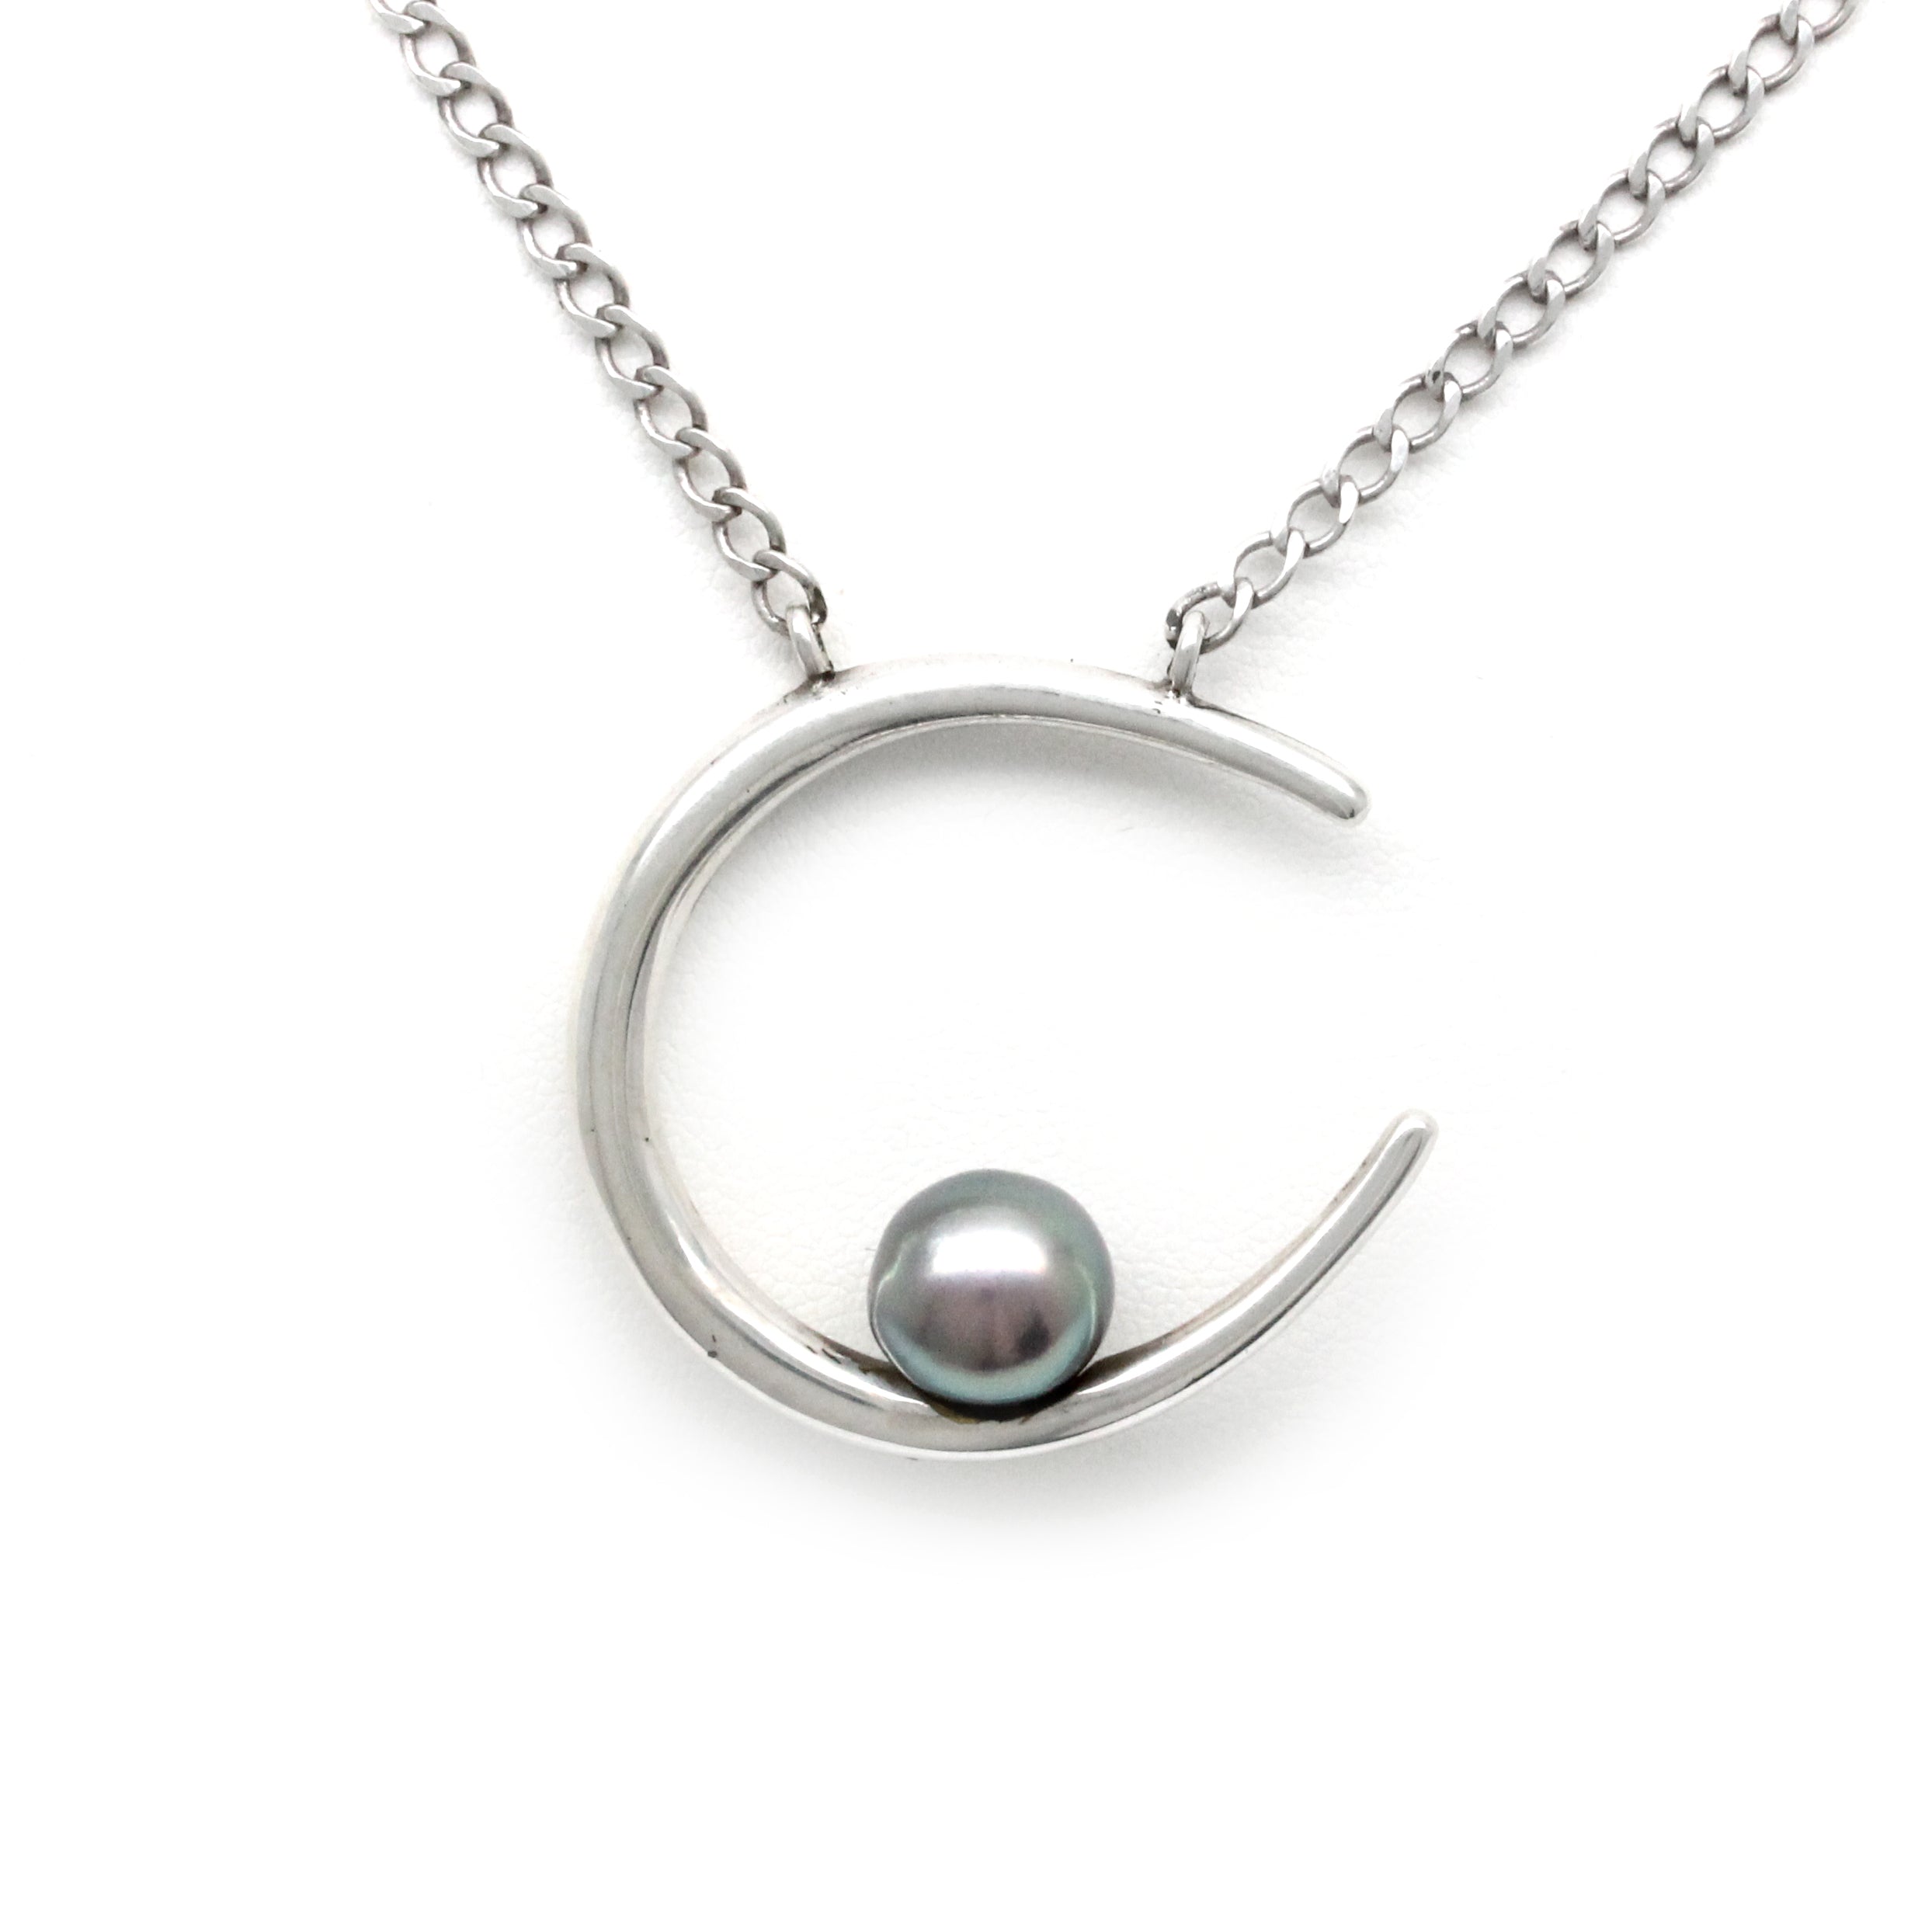 "Horse-Shoe" Silver Chain with Cortez Pearl